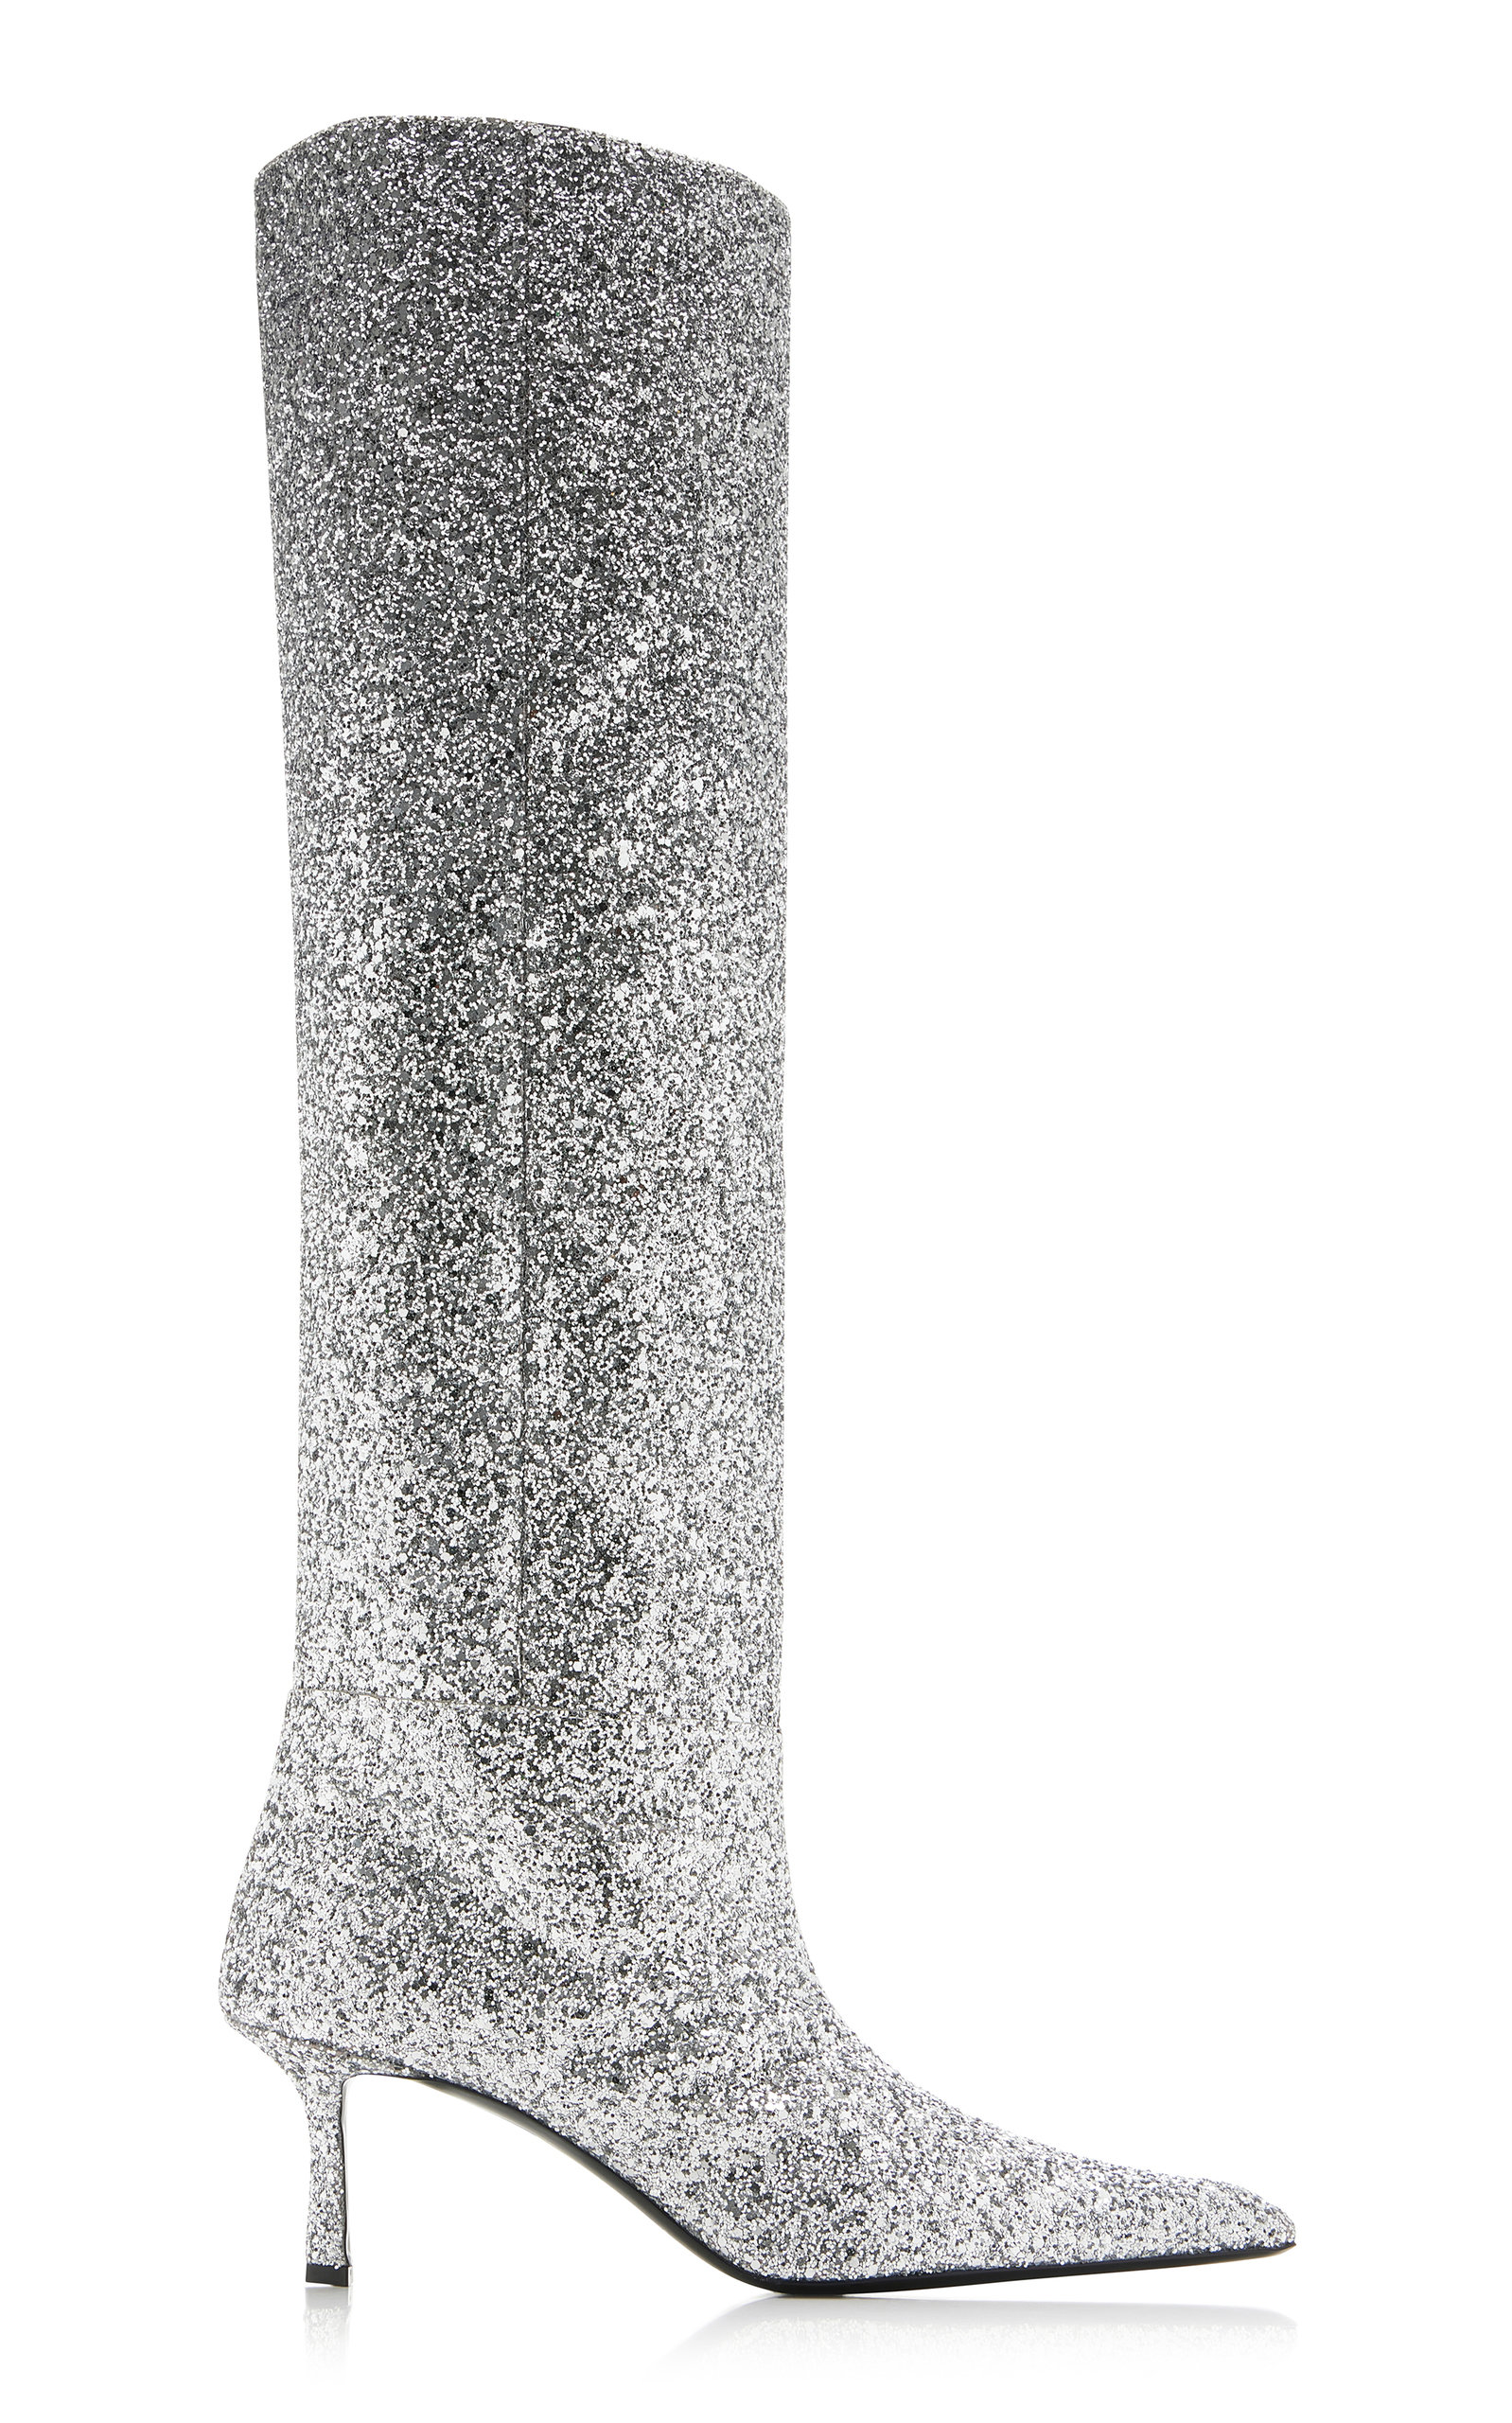 ALEXANDER WANG VIOLA GLITTERED LEATHER KNEE BOOTS